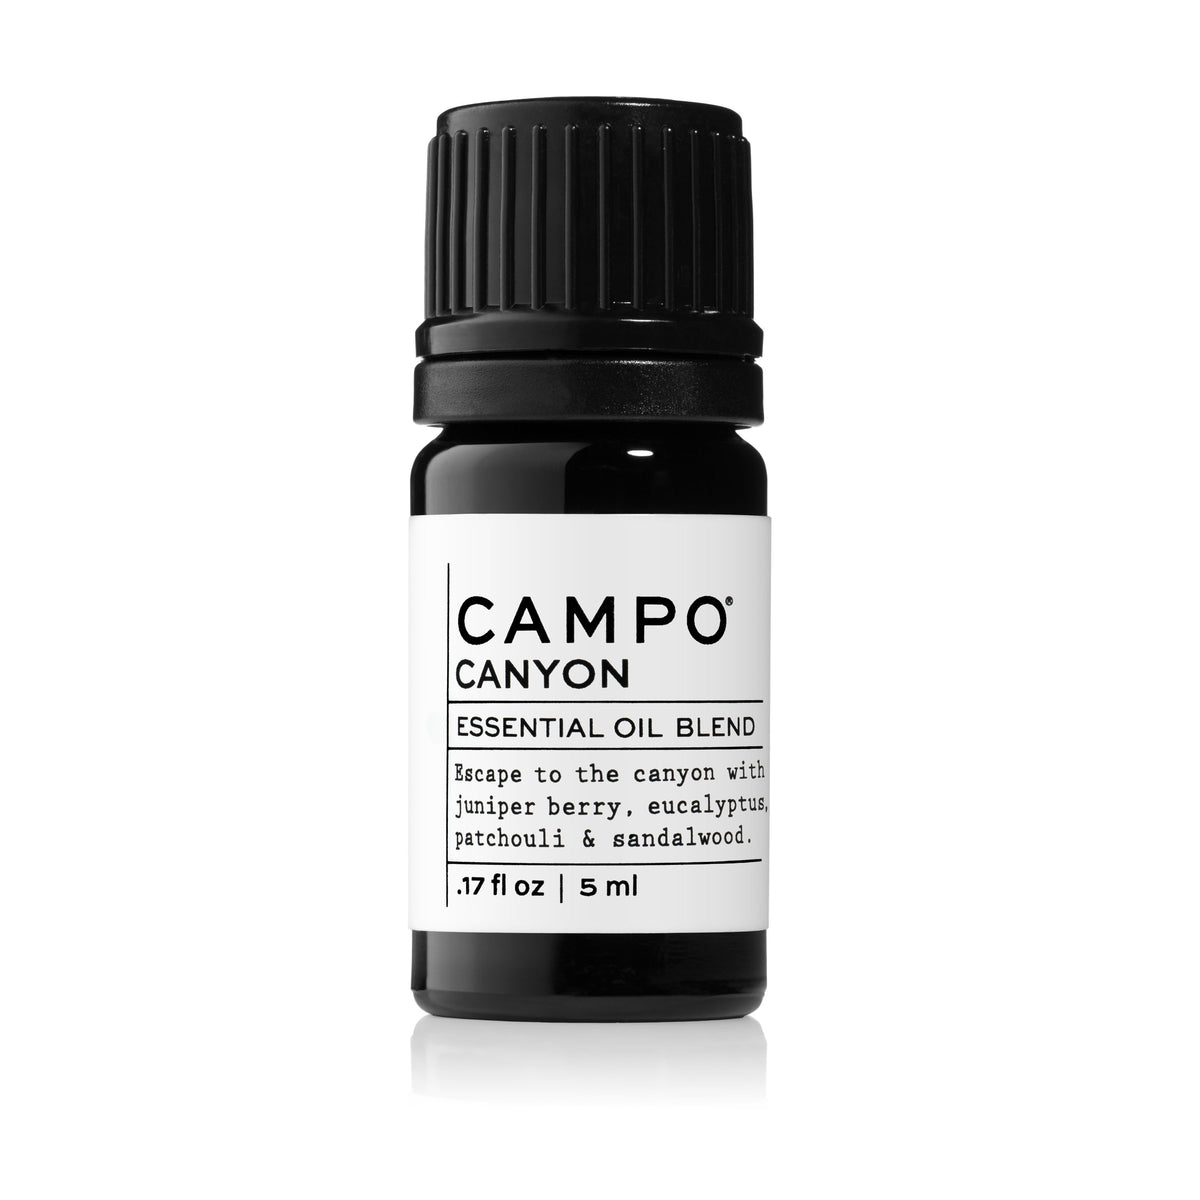 Campo Beauty 5 ml Escape to the canyon with this 100% pure essential oil blend of juniper berry, patchouli, eucalyptus radiata, and sandalwood.